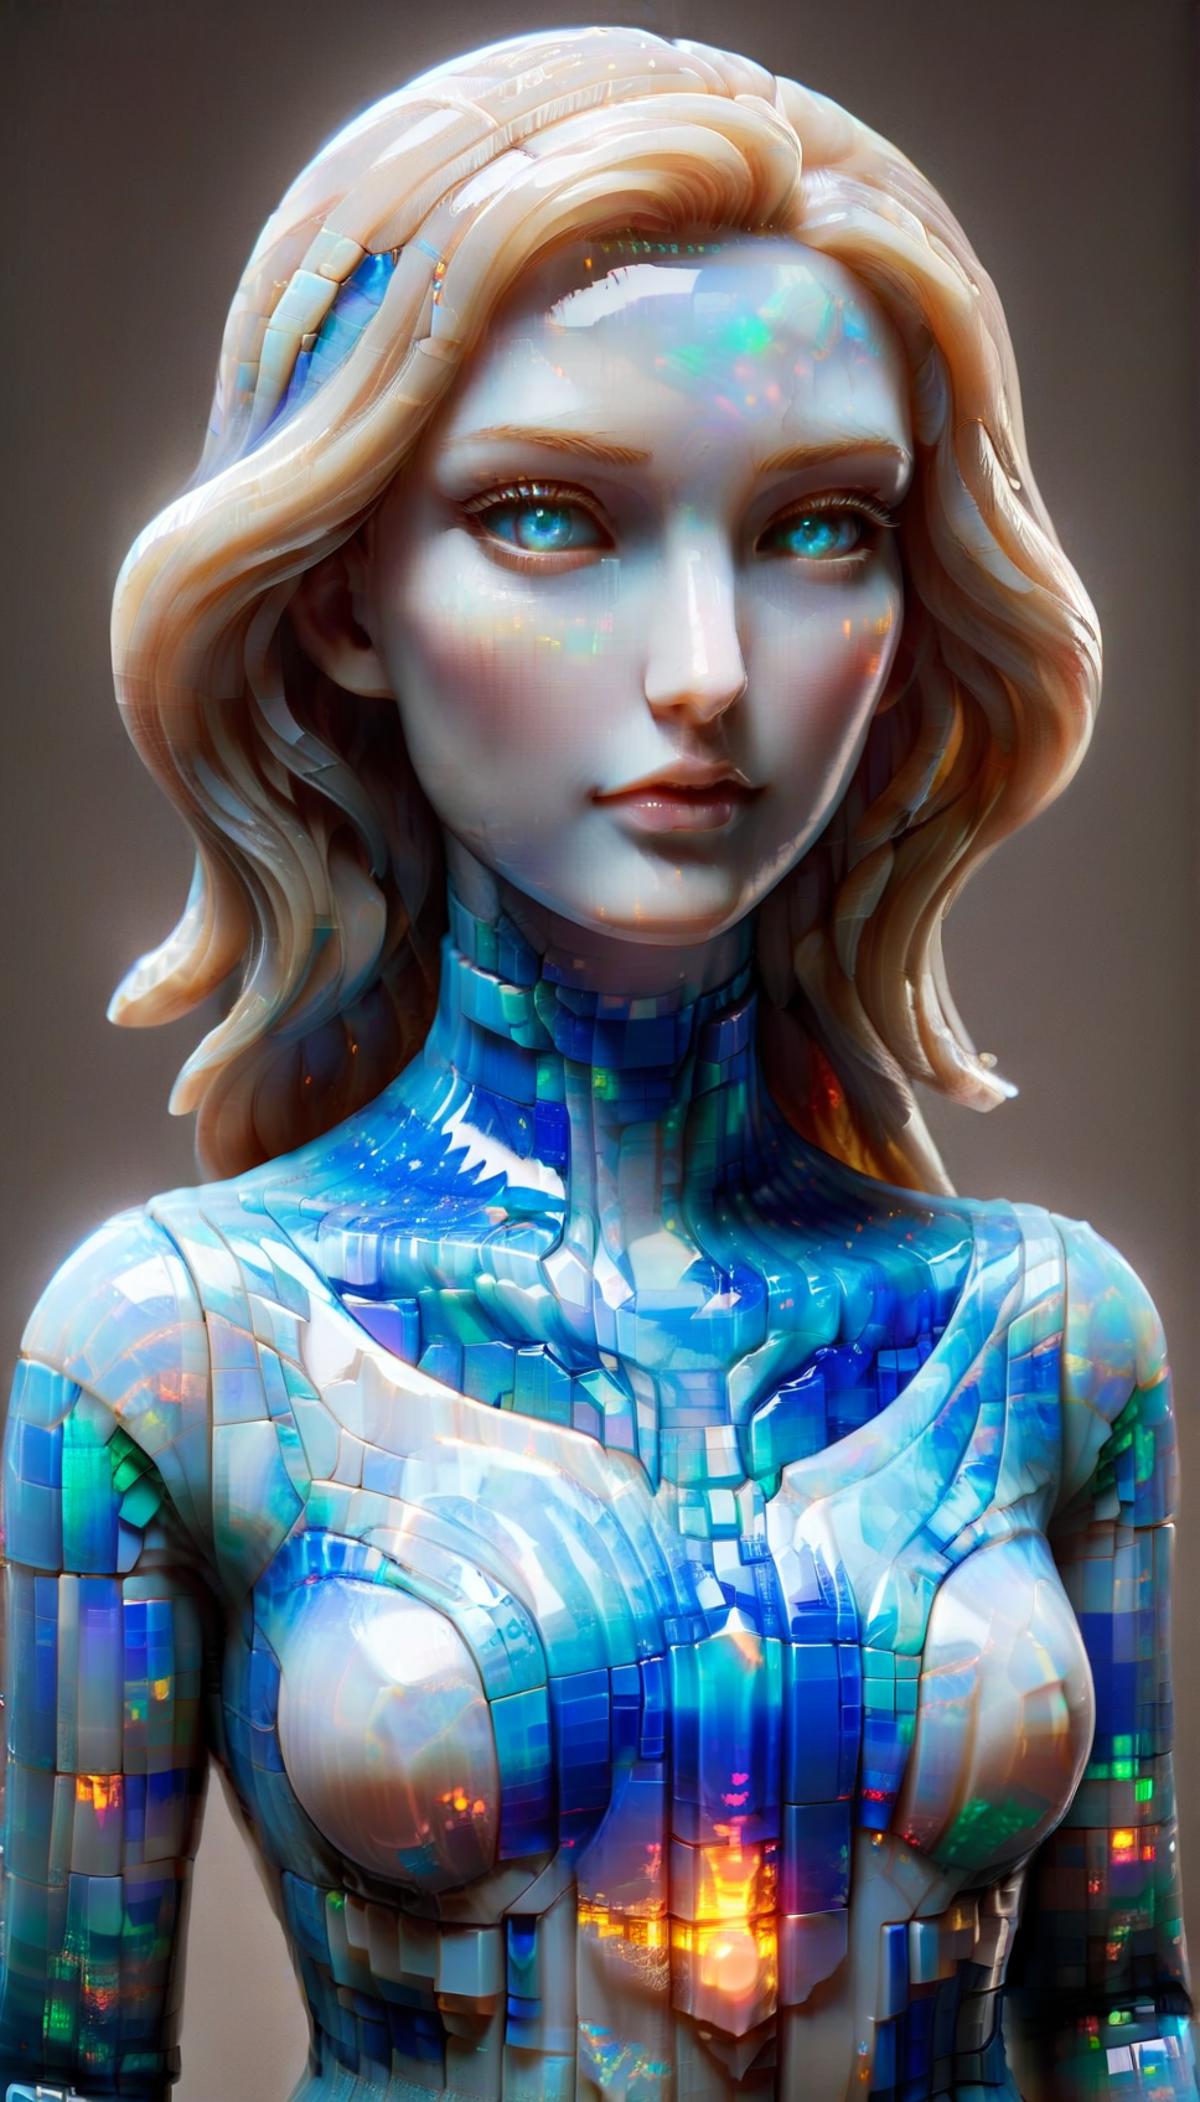 AI model image by CHINGEL